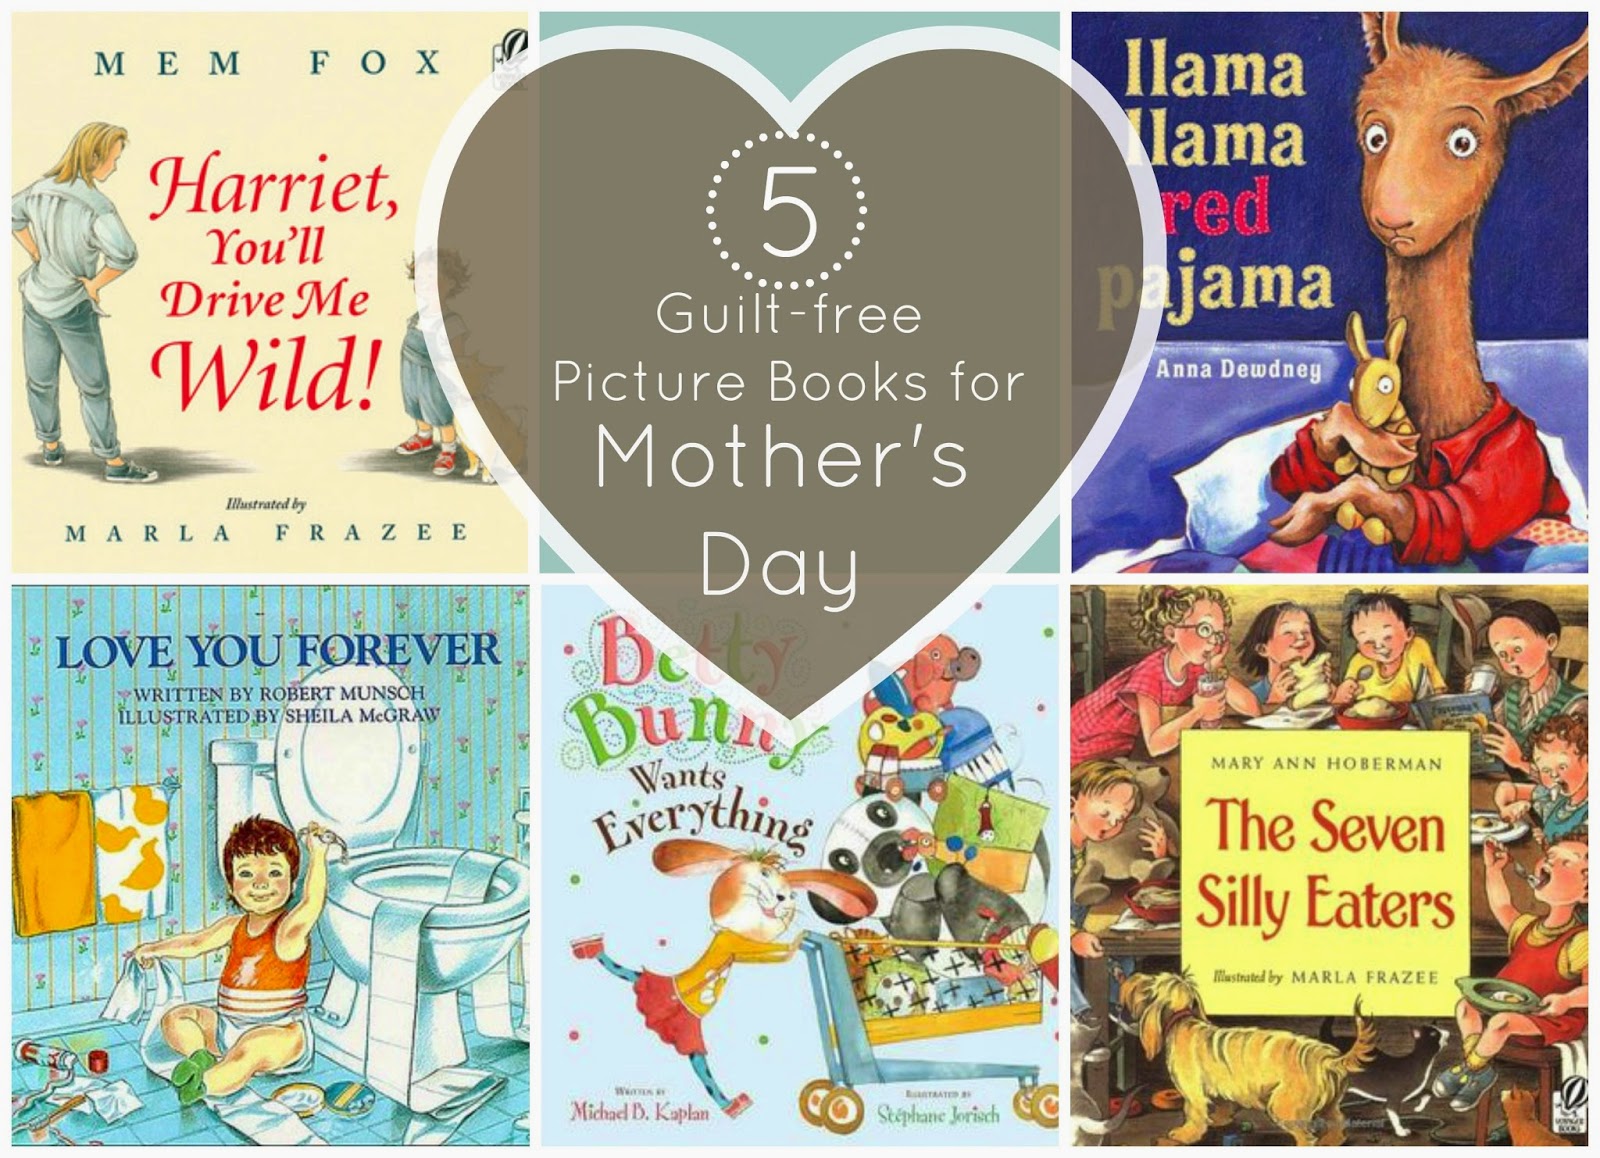 Here are five picture books that won't make you feel guilty about the stress and drama that accompany motherhood.